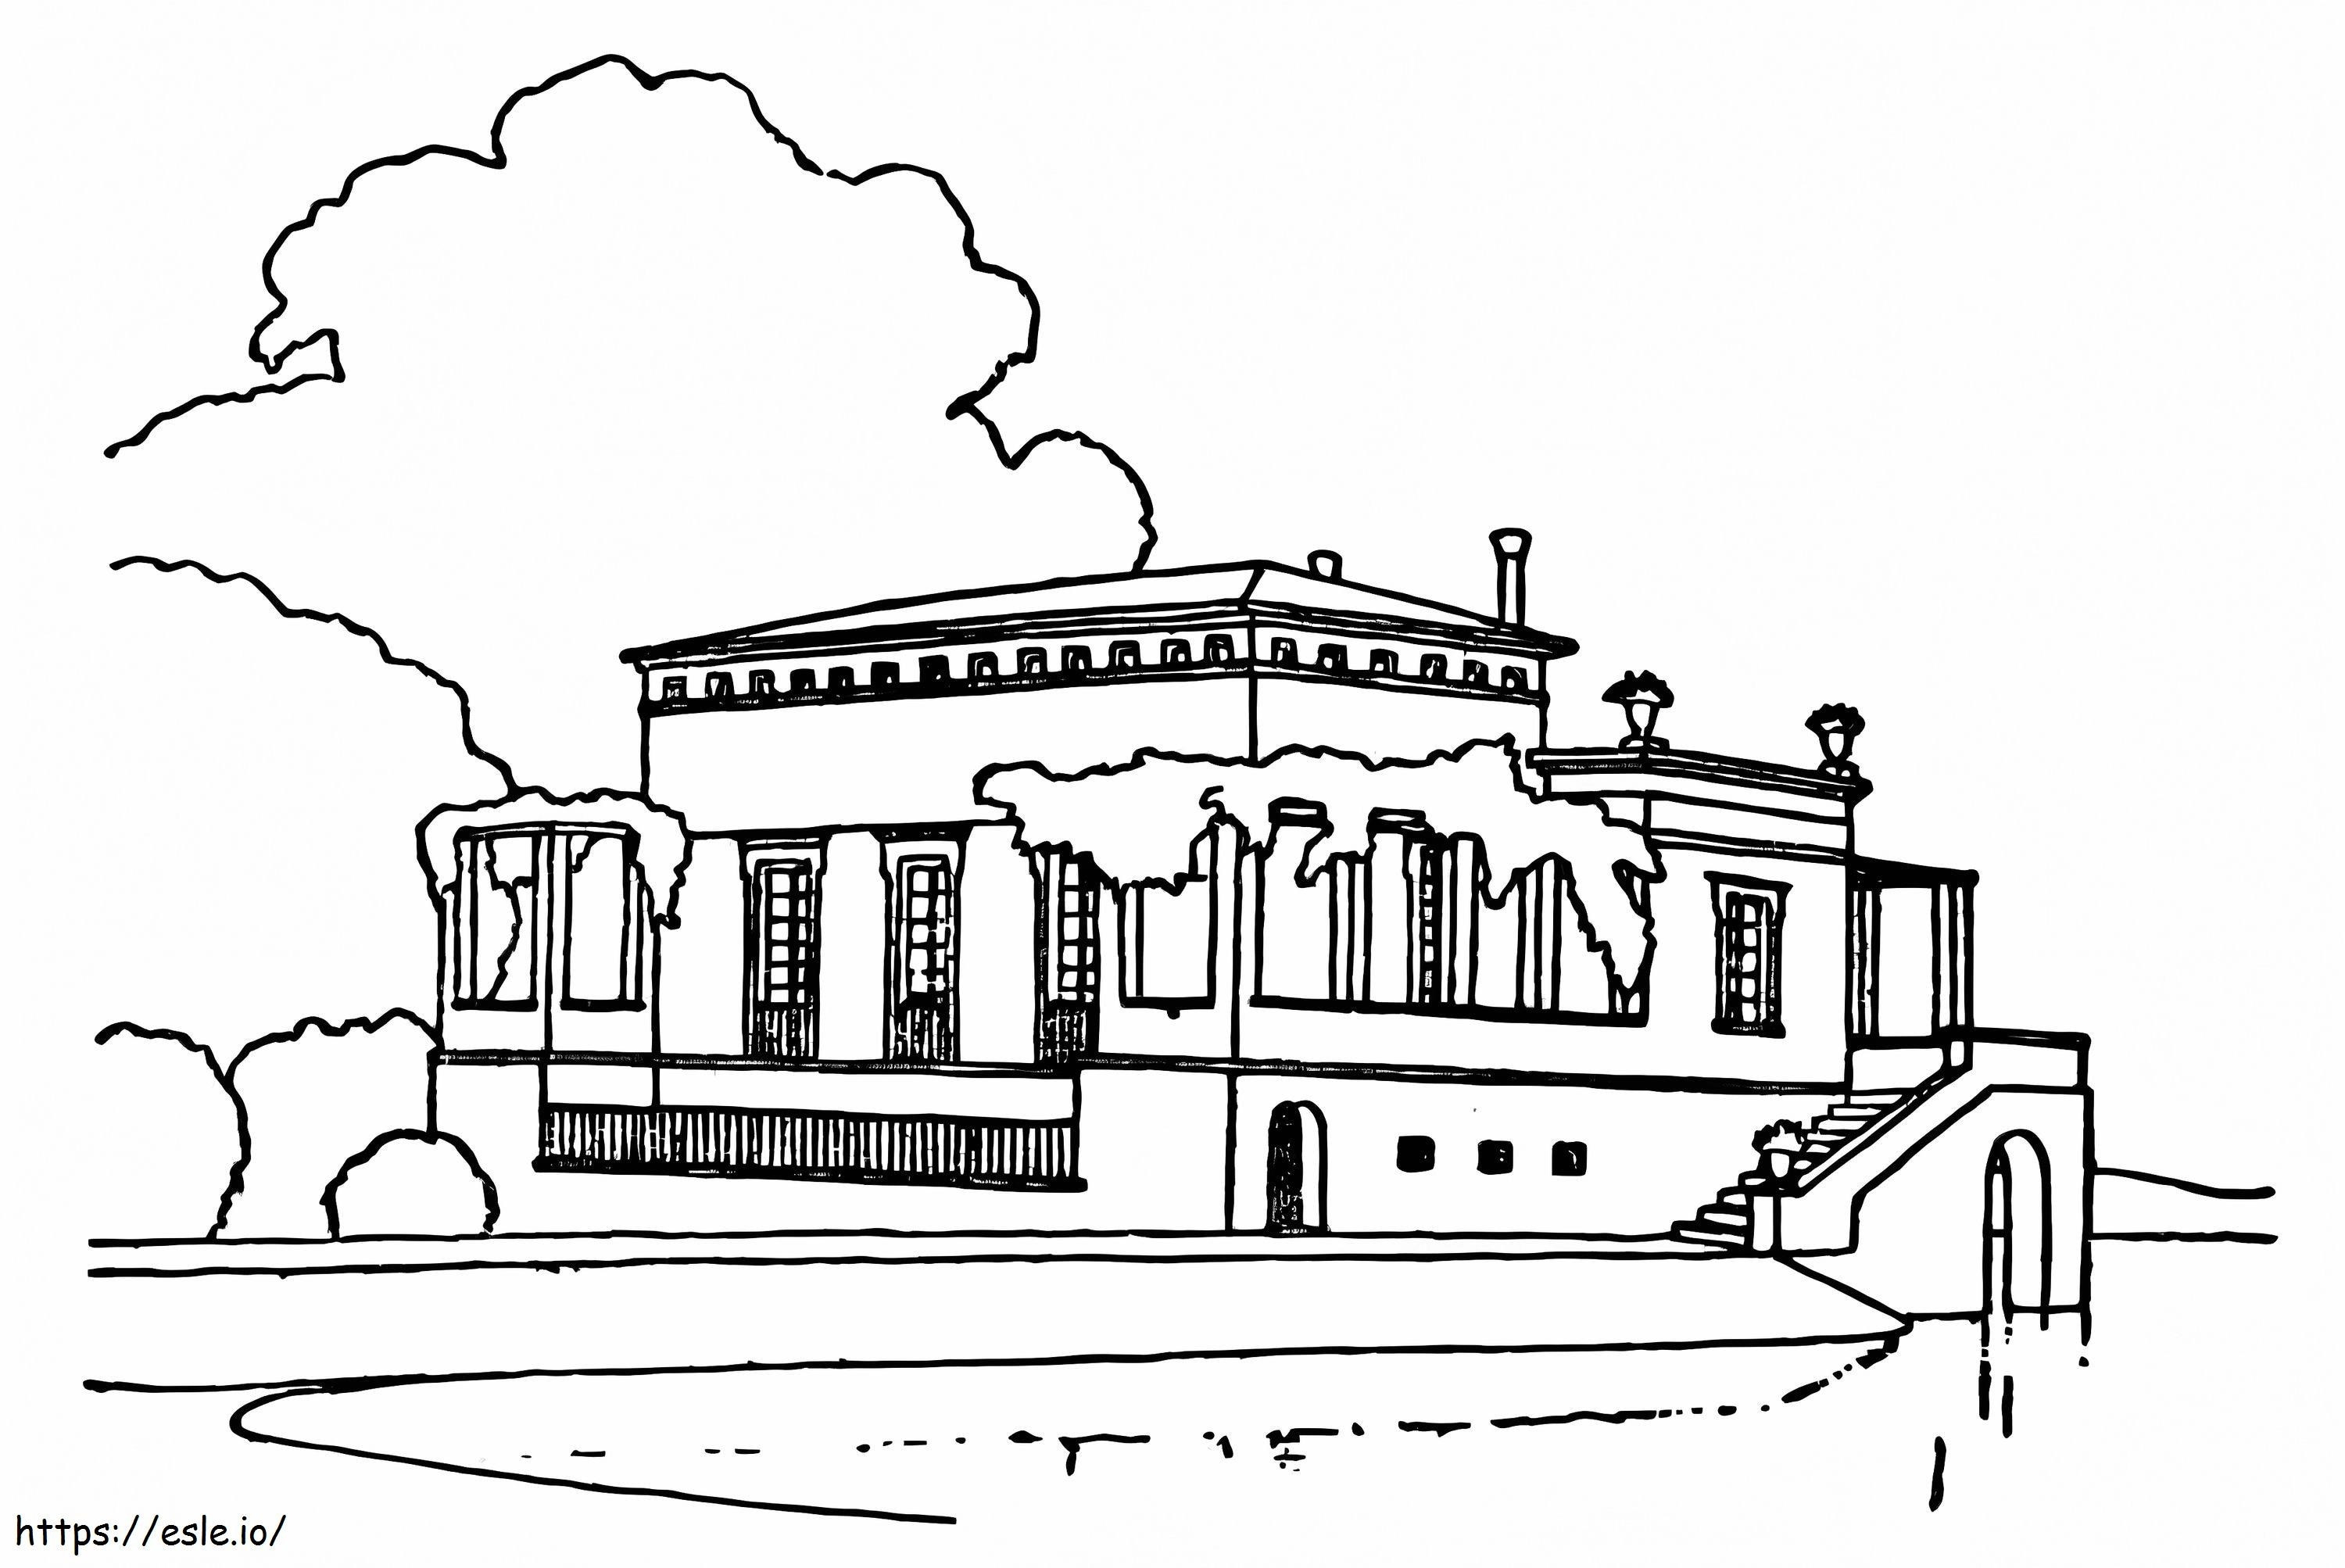 Luxury Country House coloring page